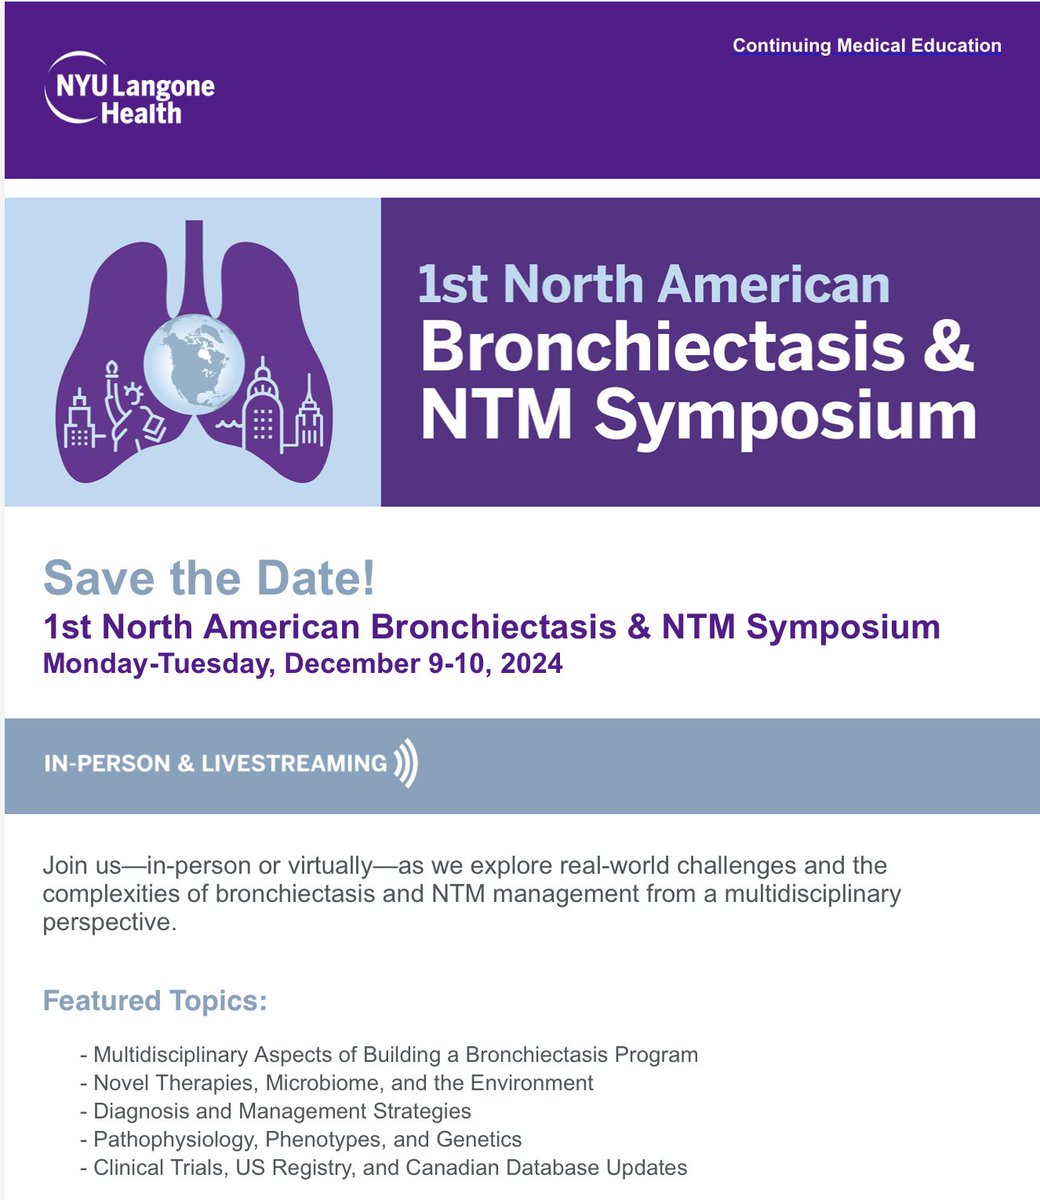 Save the Date for the 1st North American #Bronchiectasis & #NTM Symposium, a forum that explores real-world challenges & complexities of bronchiectasis/NTM management. 📆 Monday-Tuesday December 9-10, 2024 📍 In Person @nyulangone & virtual 🔗 bit.ly/44yduck